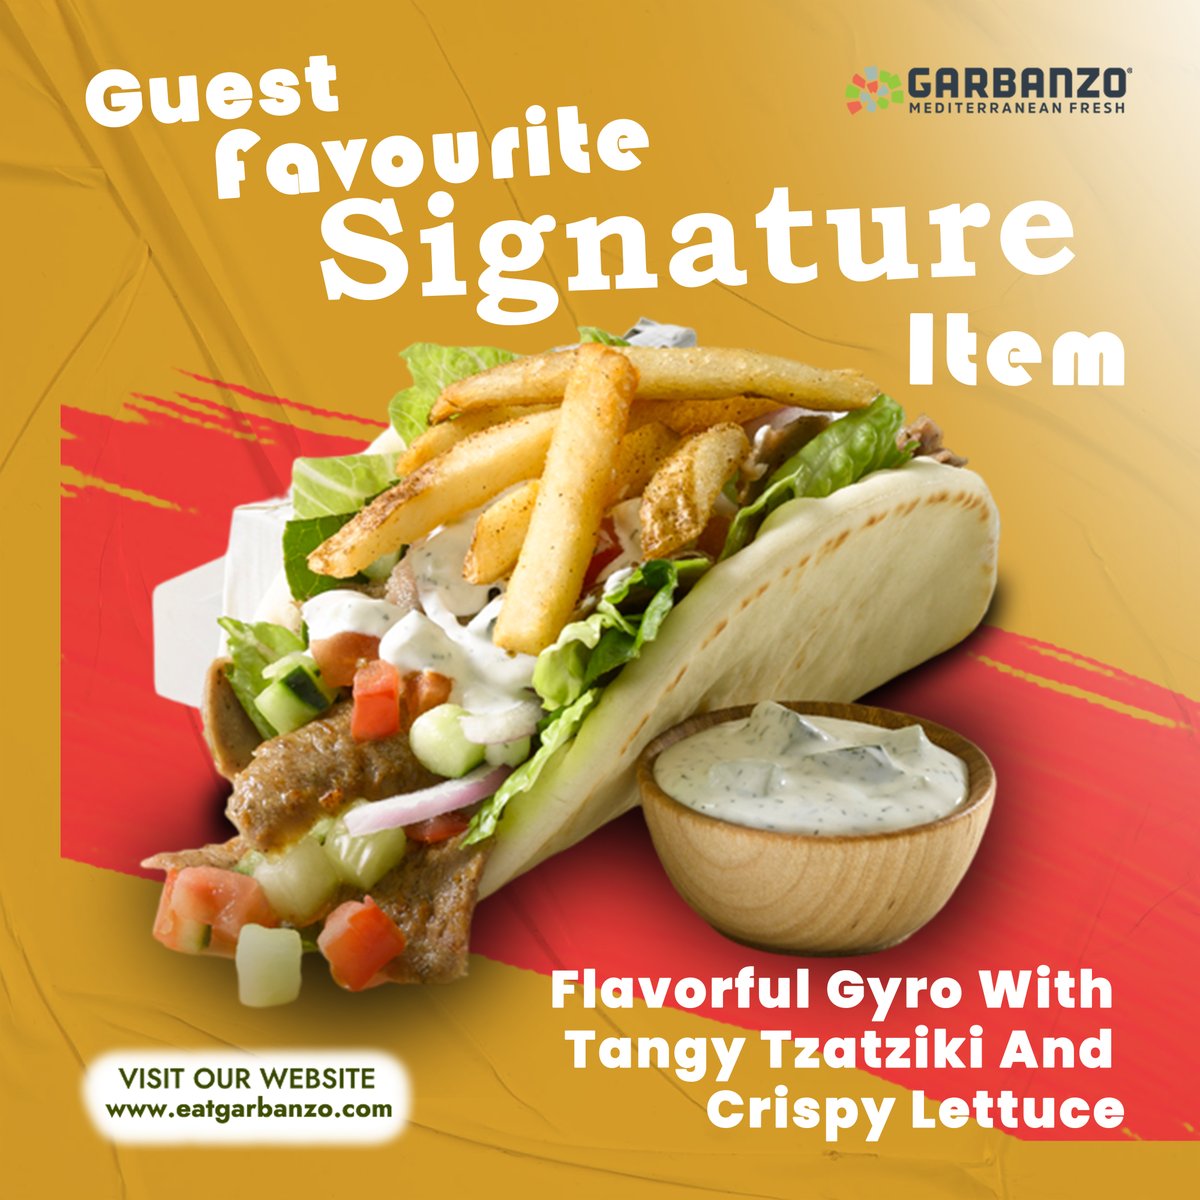 Embark on a flavorful journey with Garbanzo's Signature Gyro, a guest's favorite that delights with tangy tzatziki and fresh crispy lettuce.

Visit us today:eatgarbanzo.com/menu/

#favorite #gyro #guestfavorite #customerchoice #best #restaurant #healthyfood #healthy #foodlovers